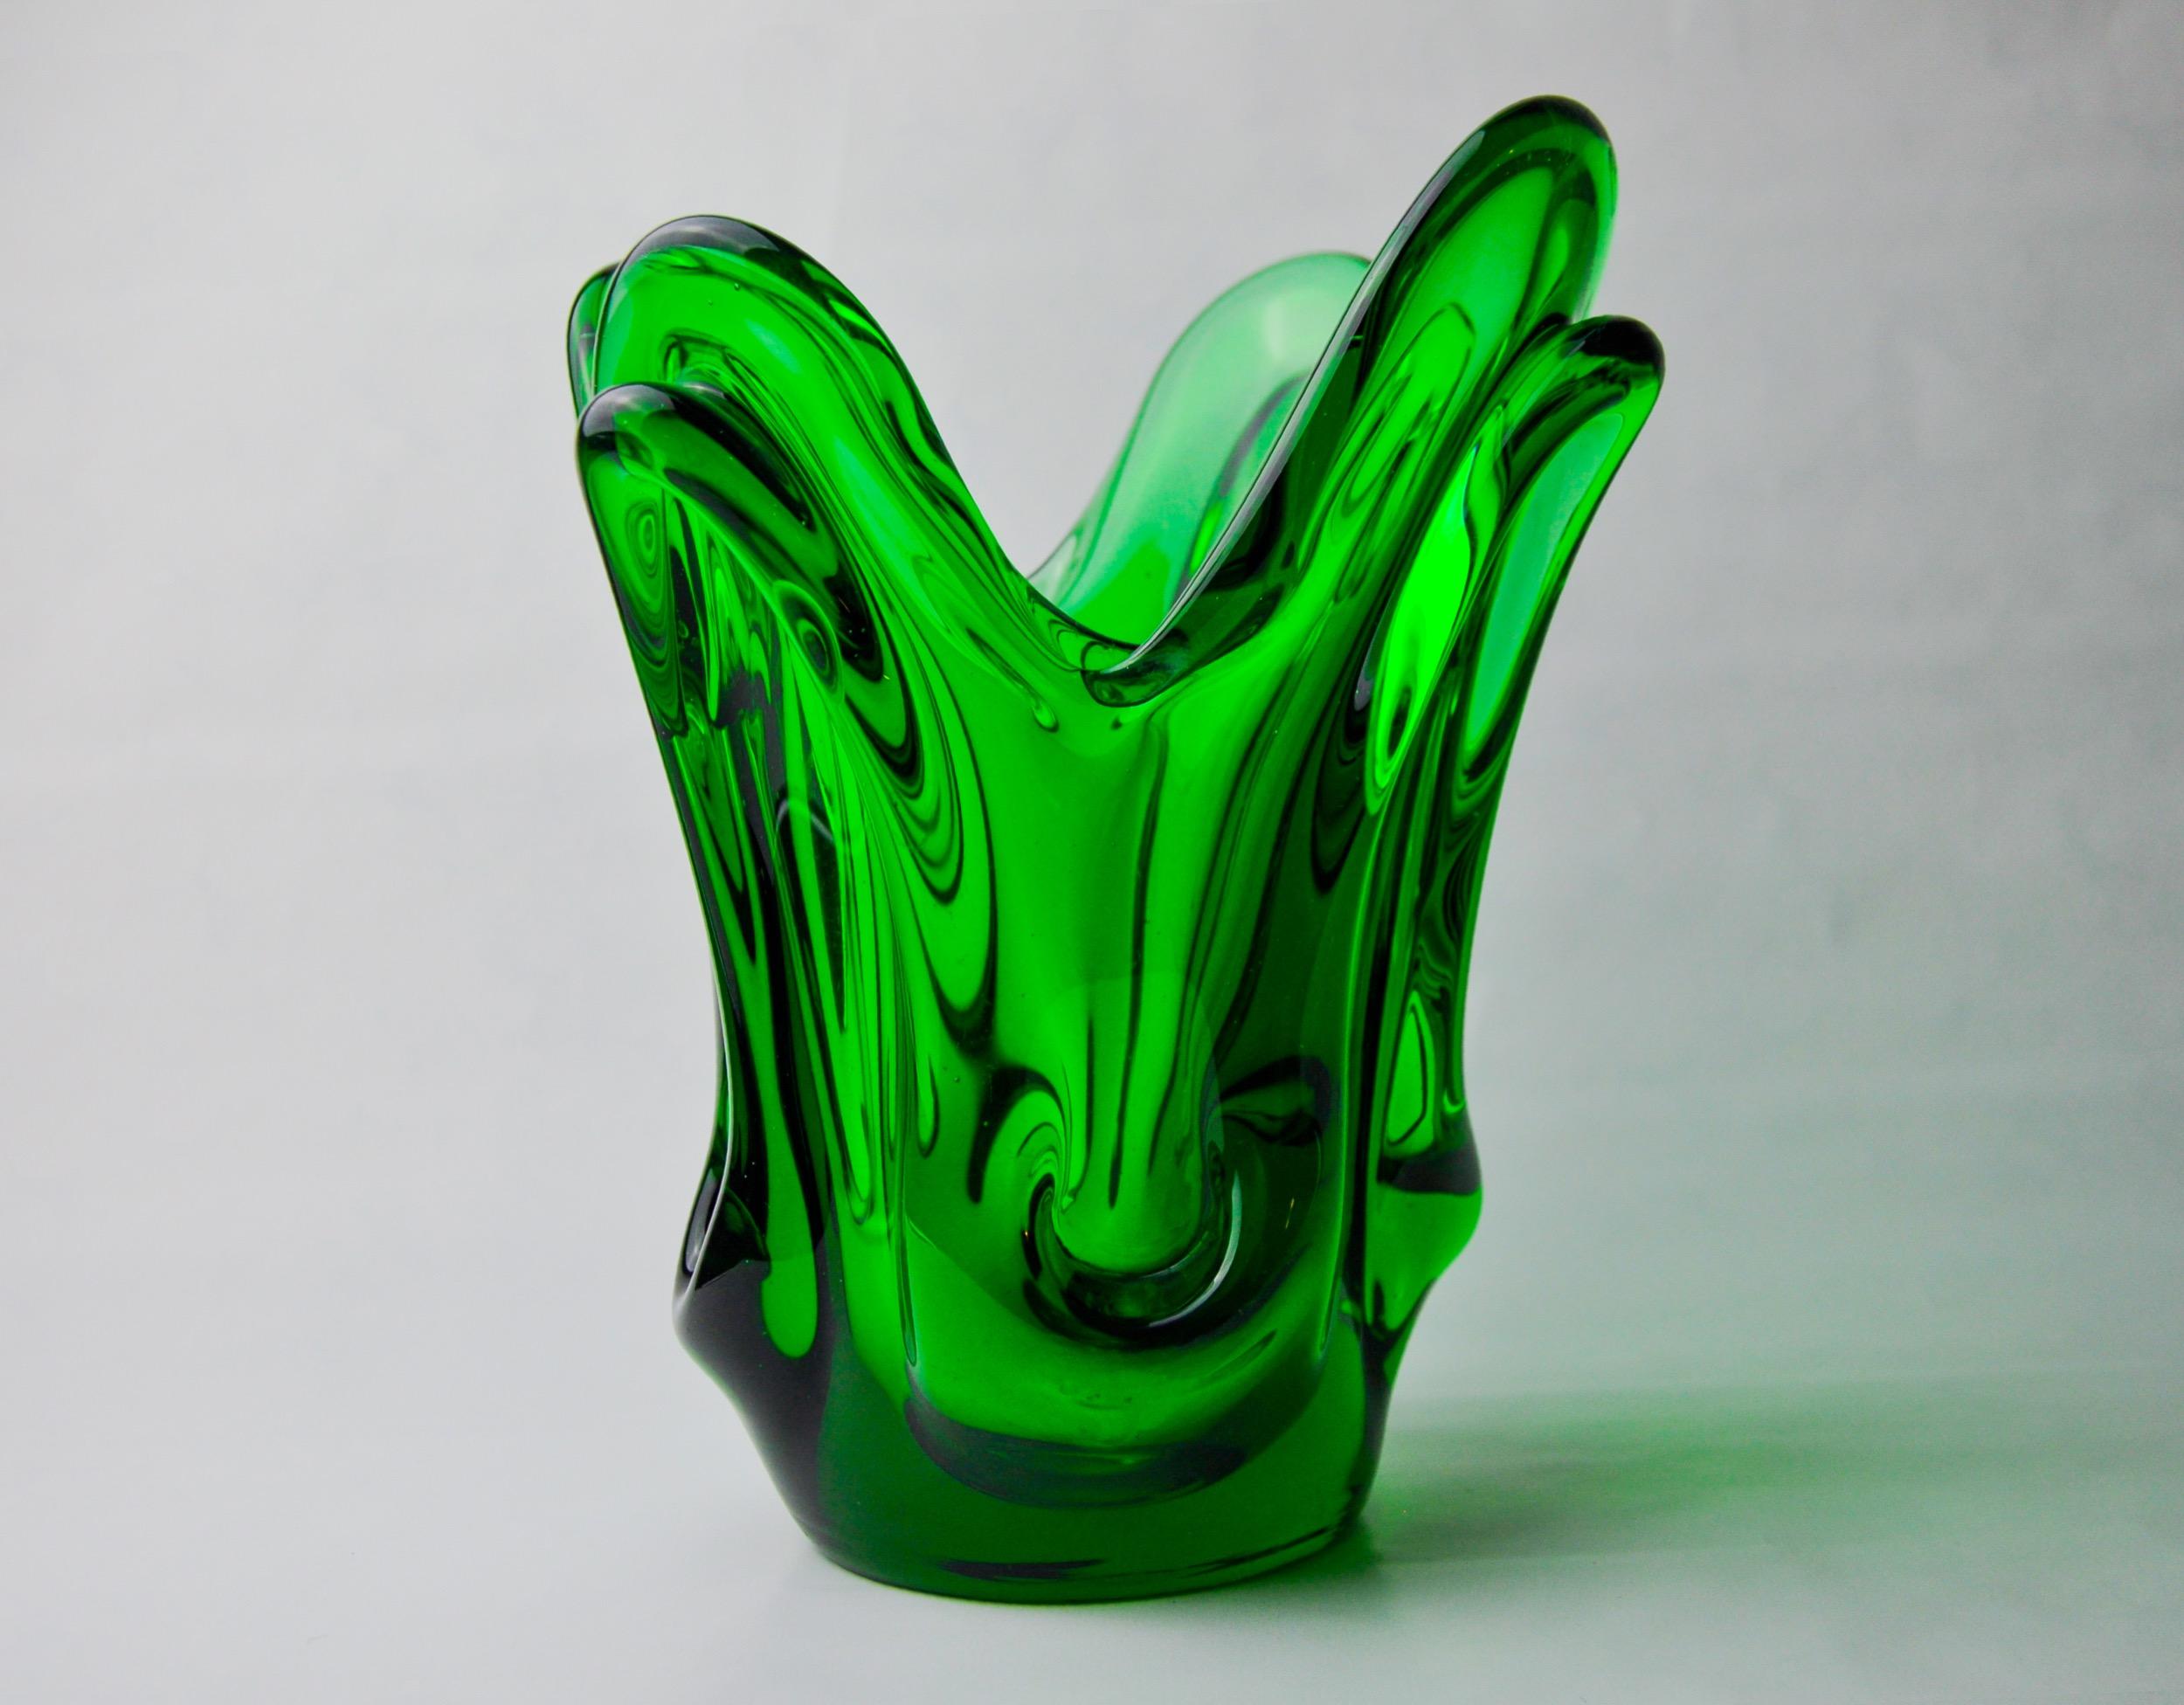 Superb vase designed and produced by seguso in italy in the 1970s. Green murano glass vase with drawn details and a ribbed edge according to the sommerso technique. Handcrafted by venetian master glassmakers. Decorative object that will bring a real